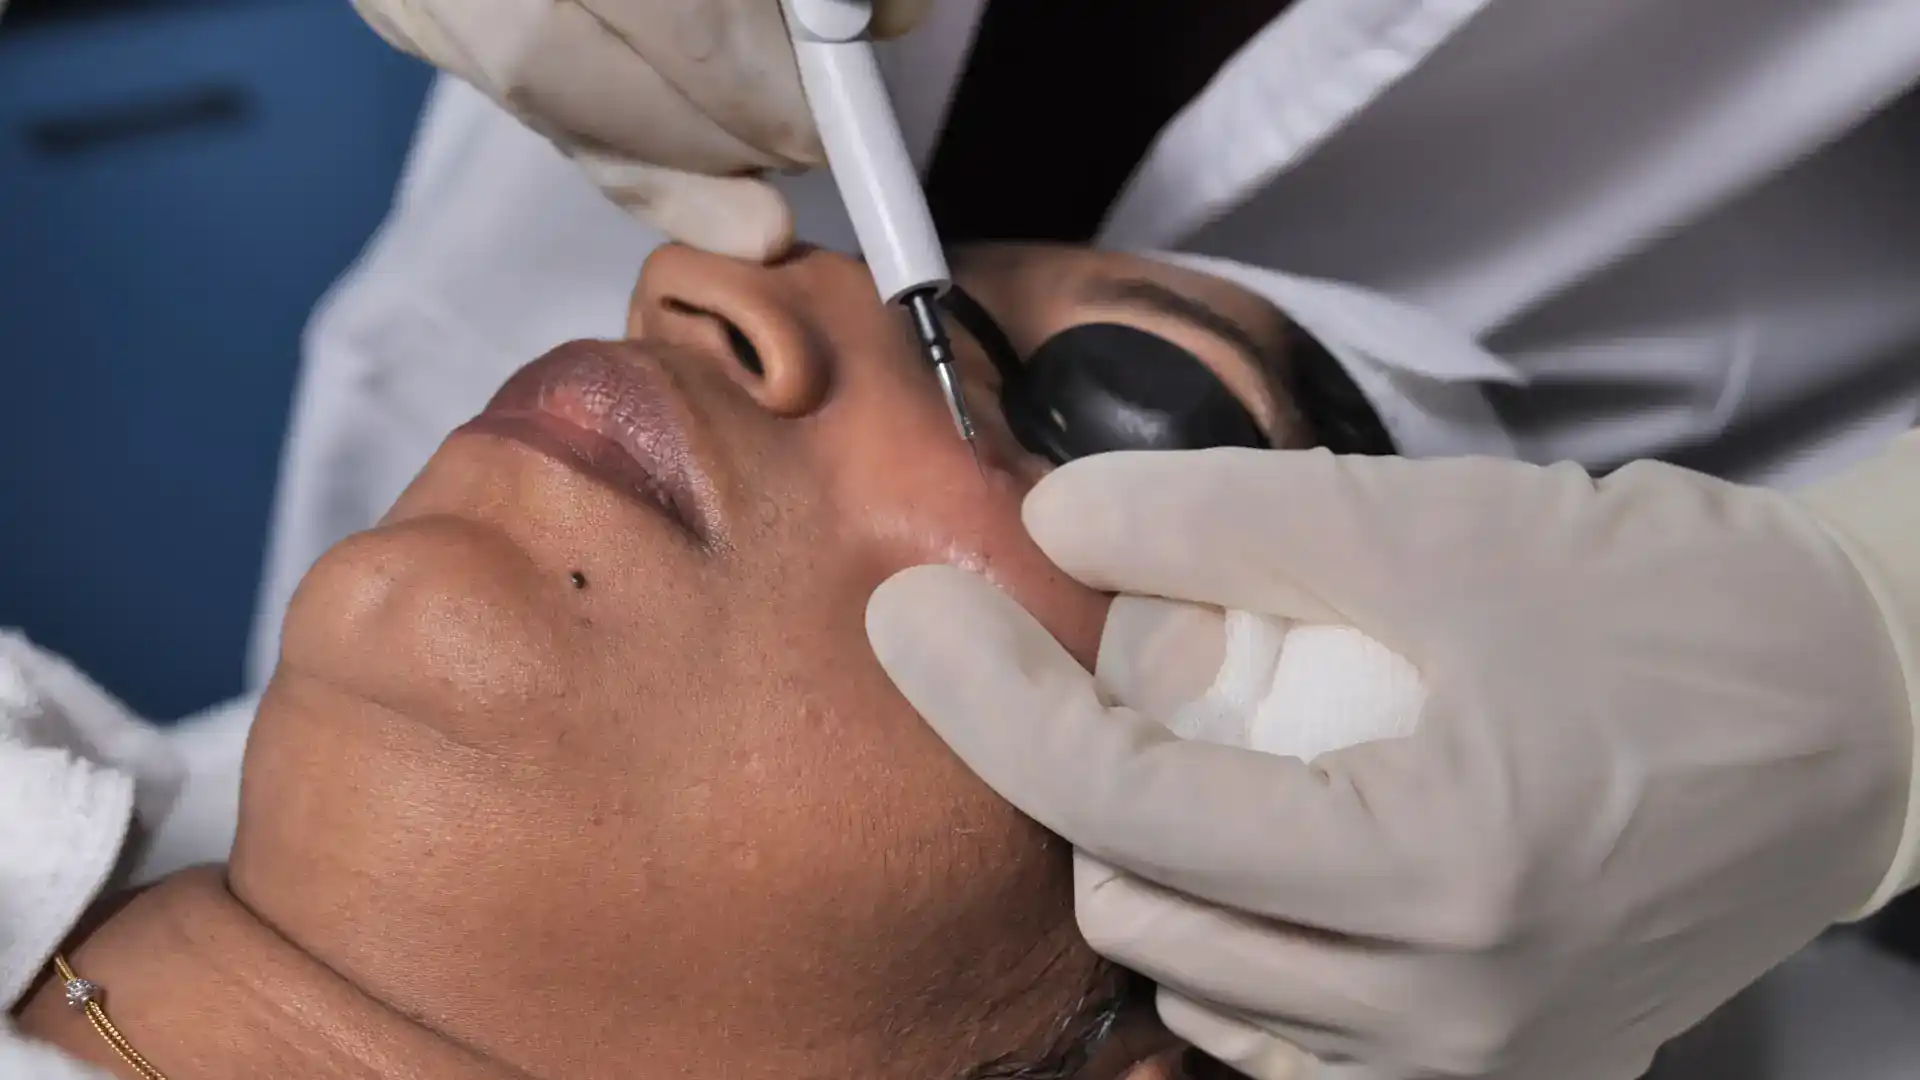 Key Benefits of Mole, Wart, and Skin Tag Removal - DermaVue